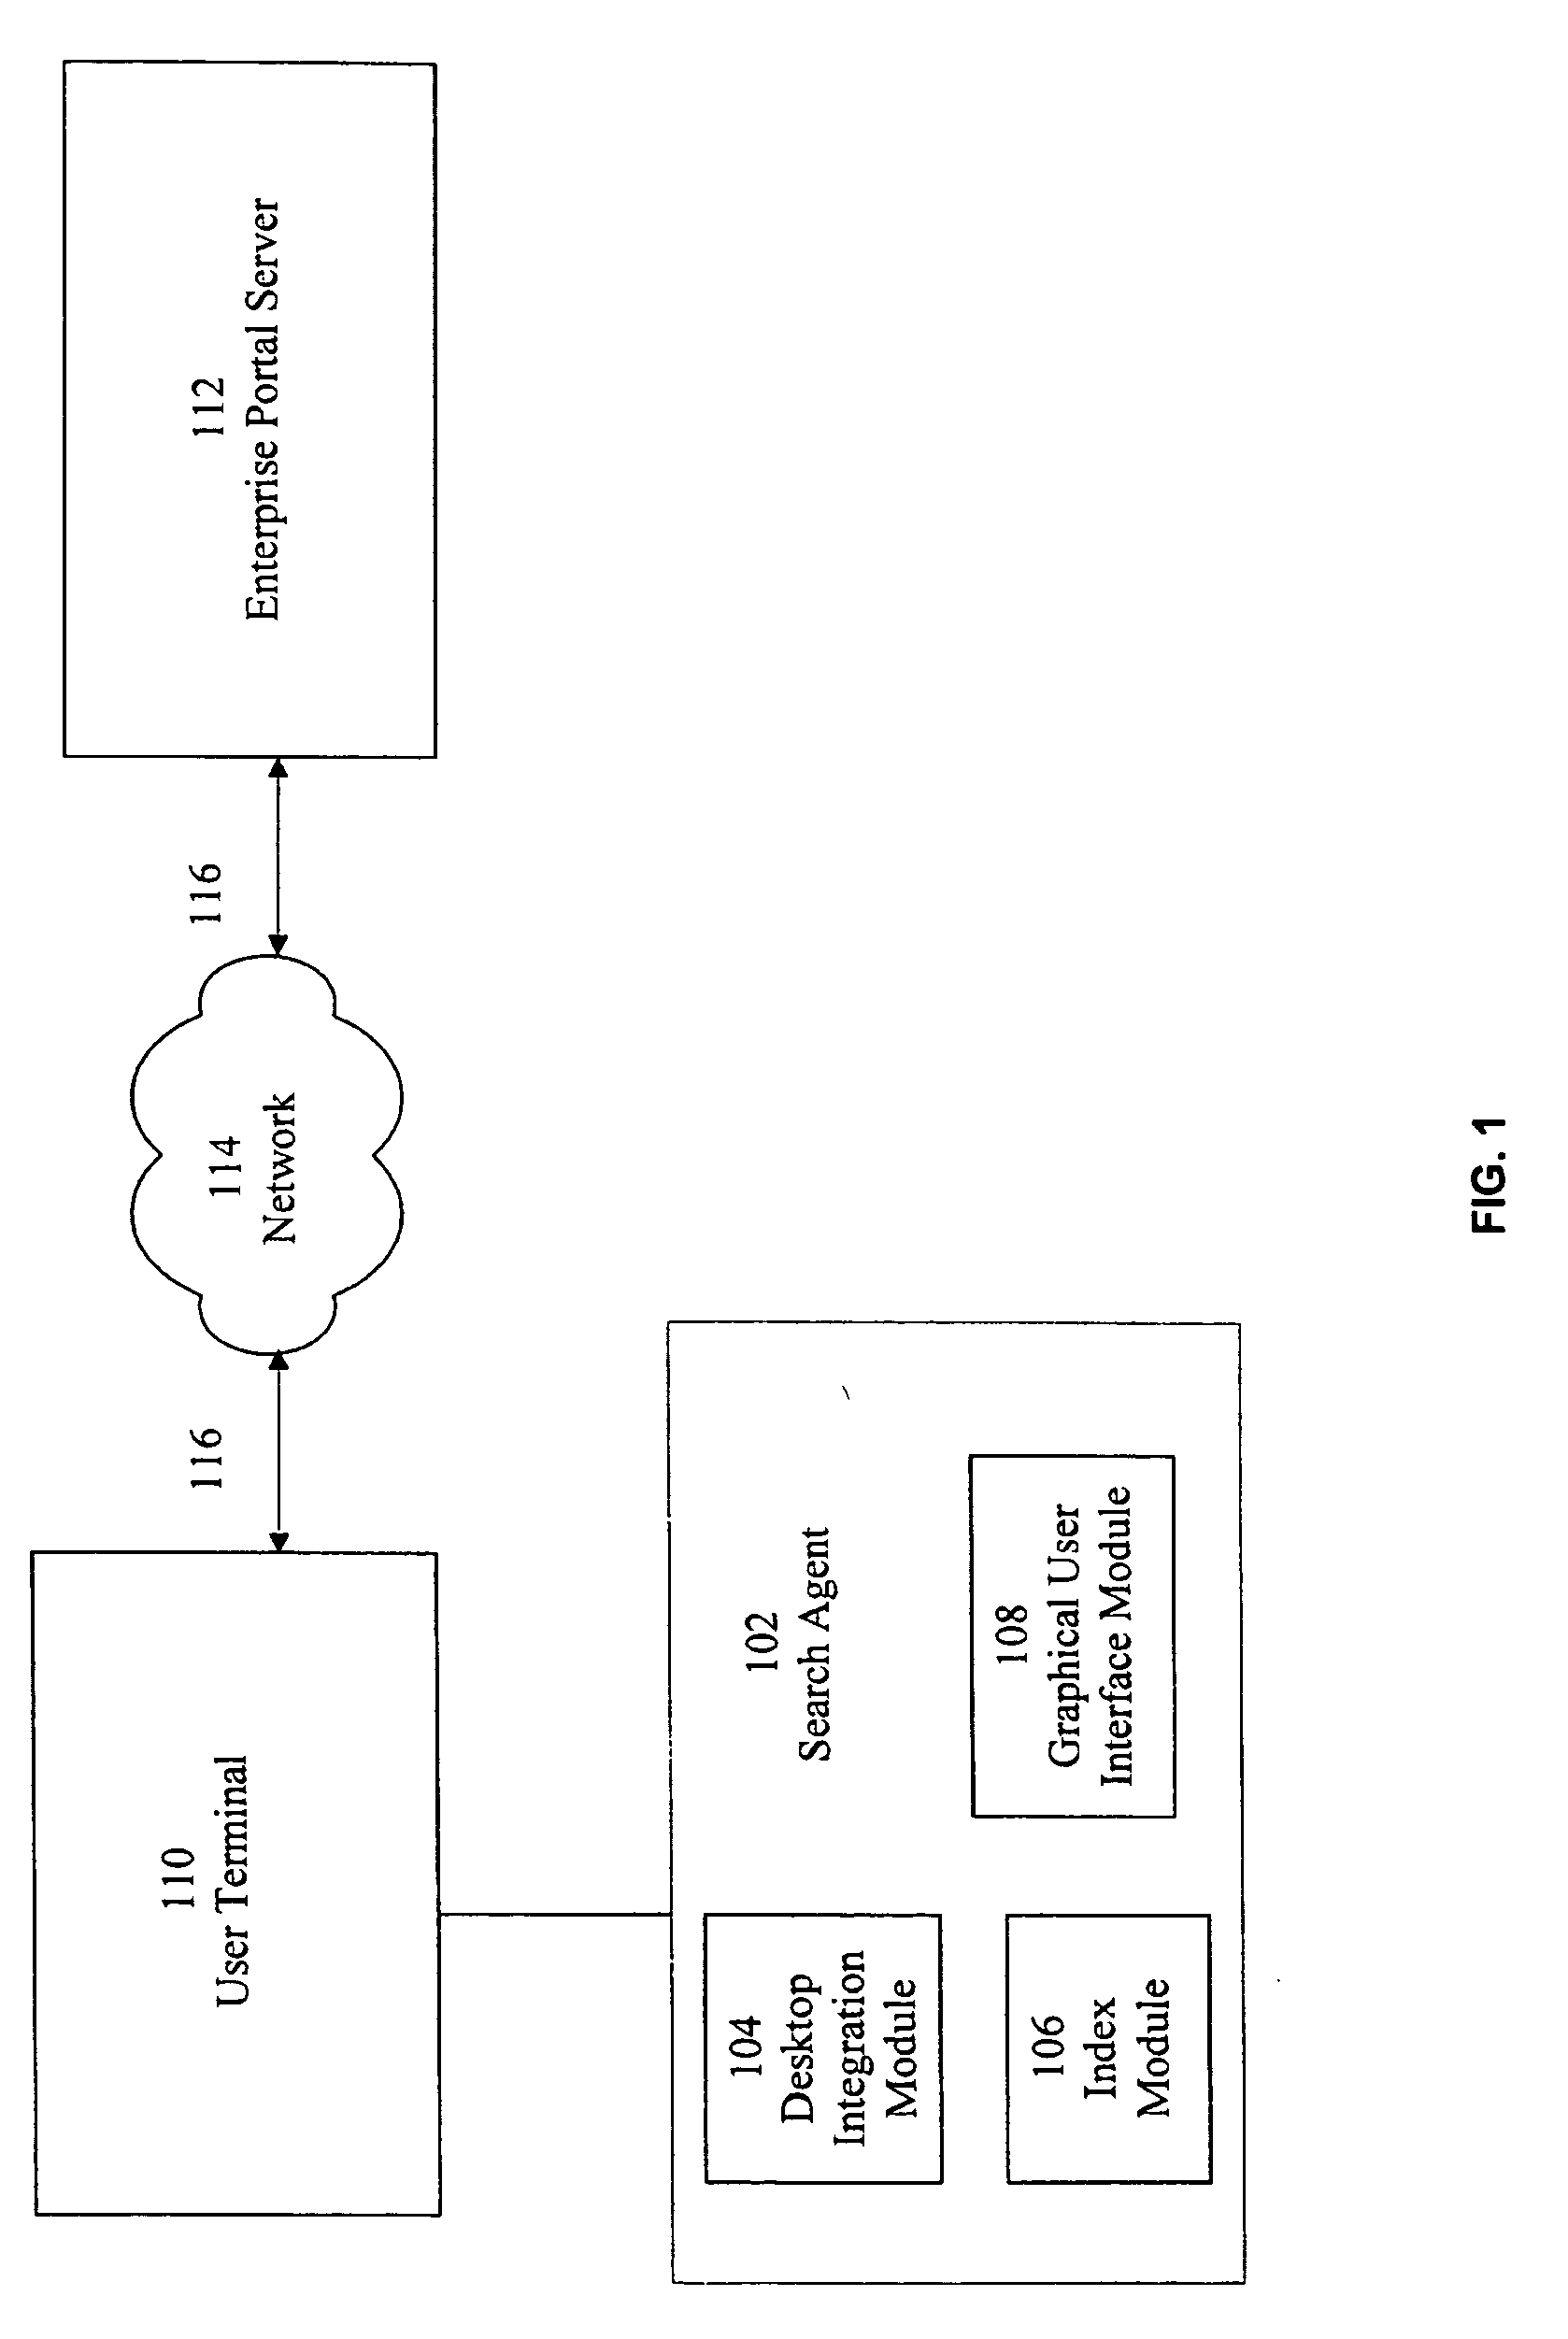 System and method for providing graphical representations of search results in multiple related histograms